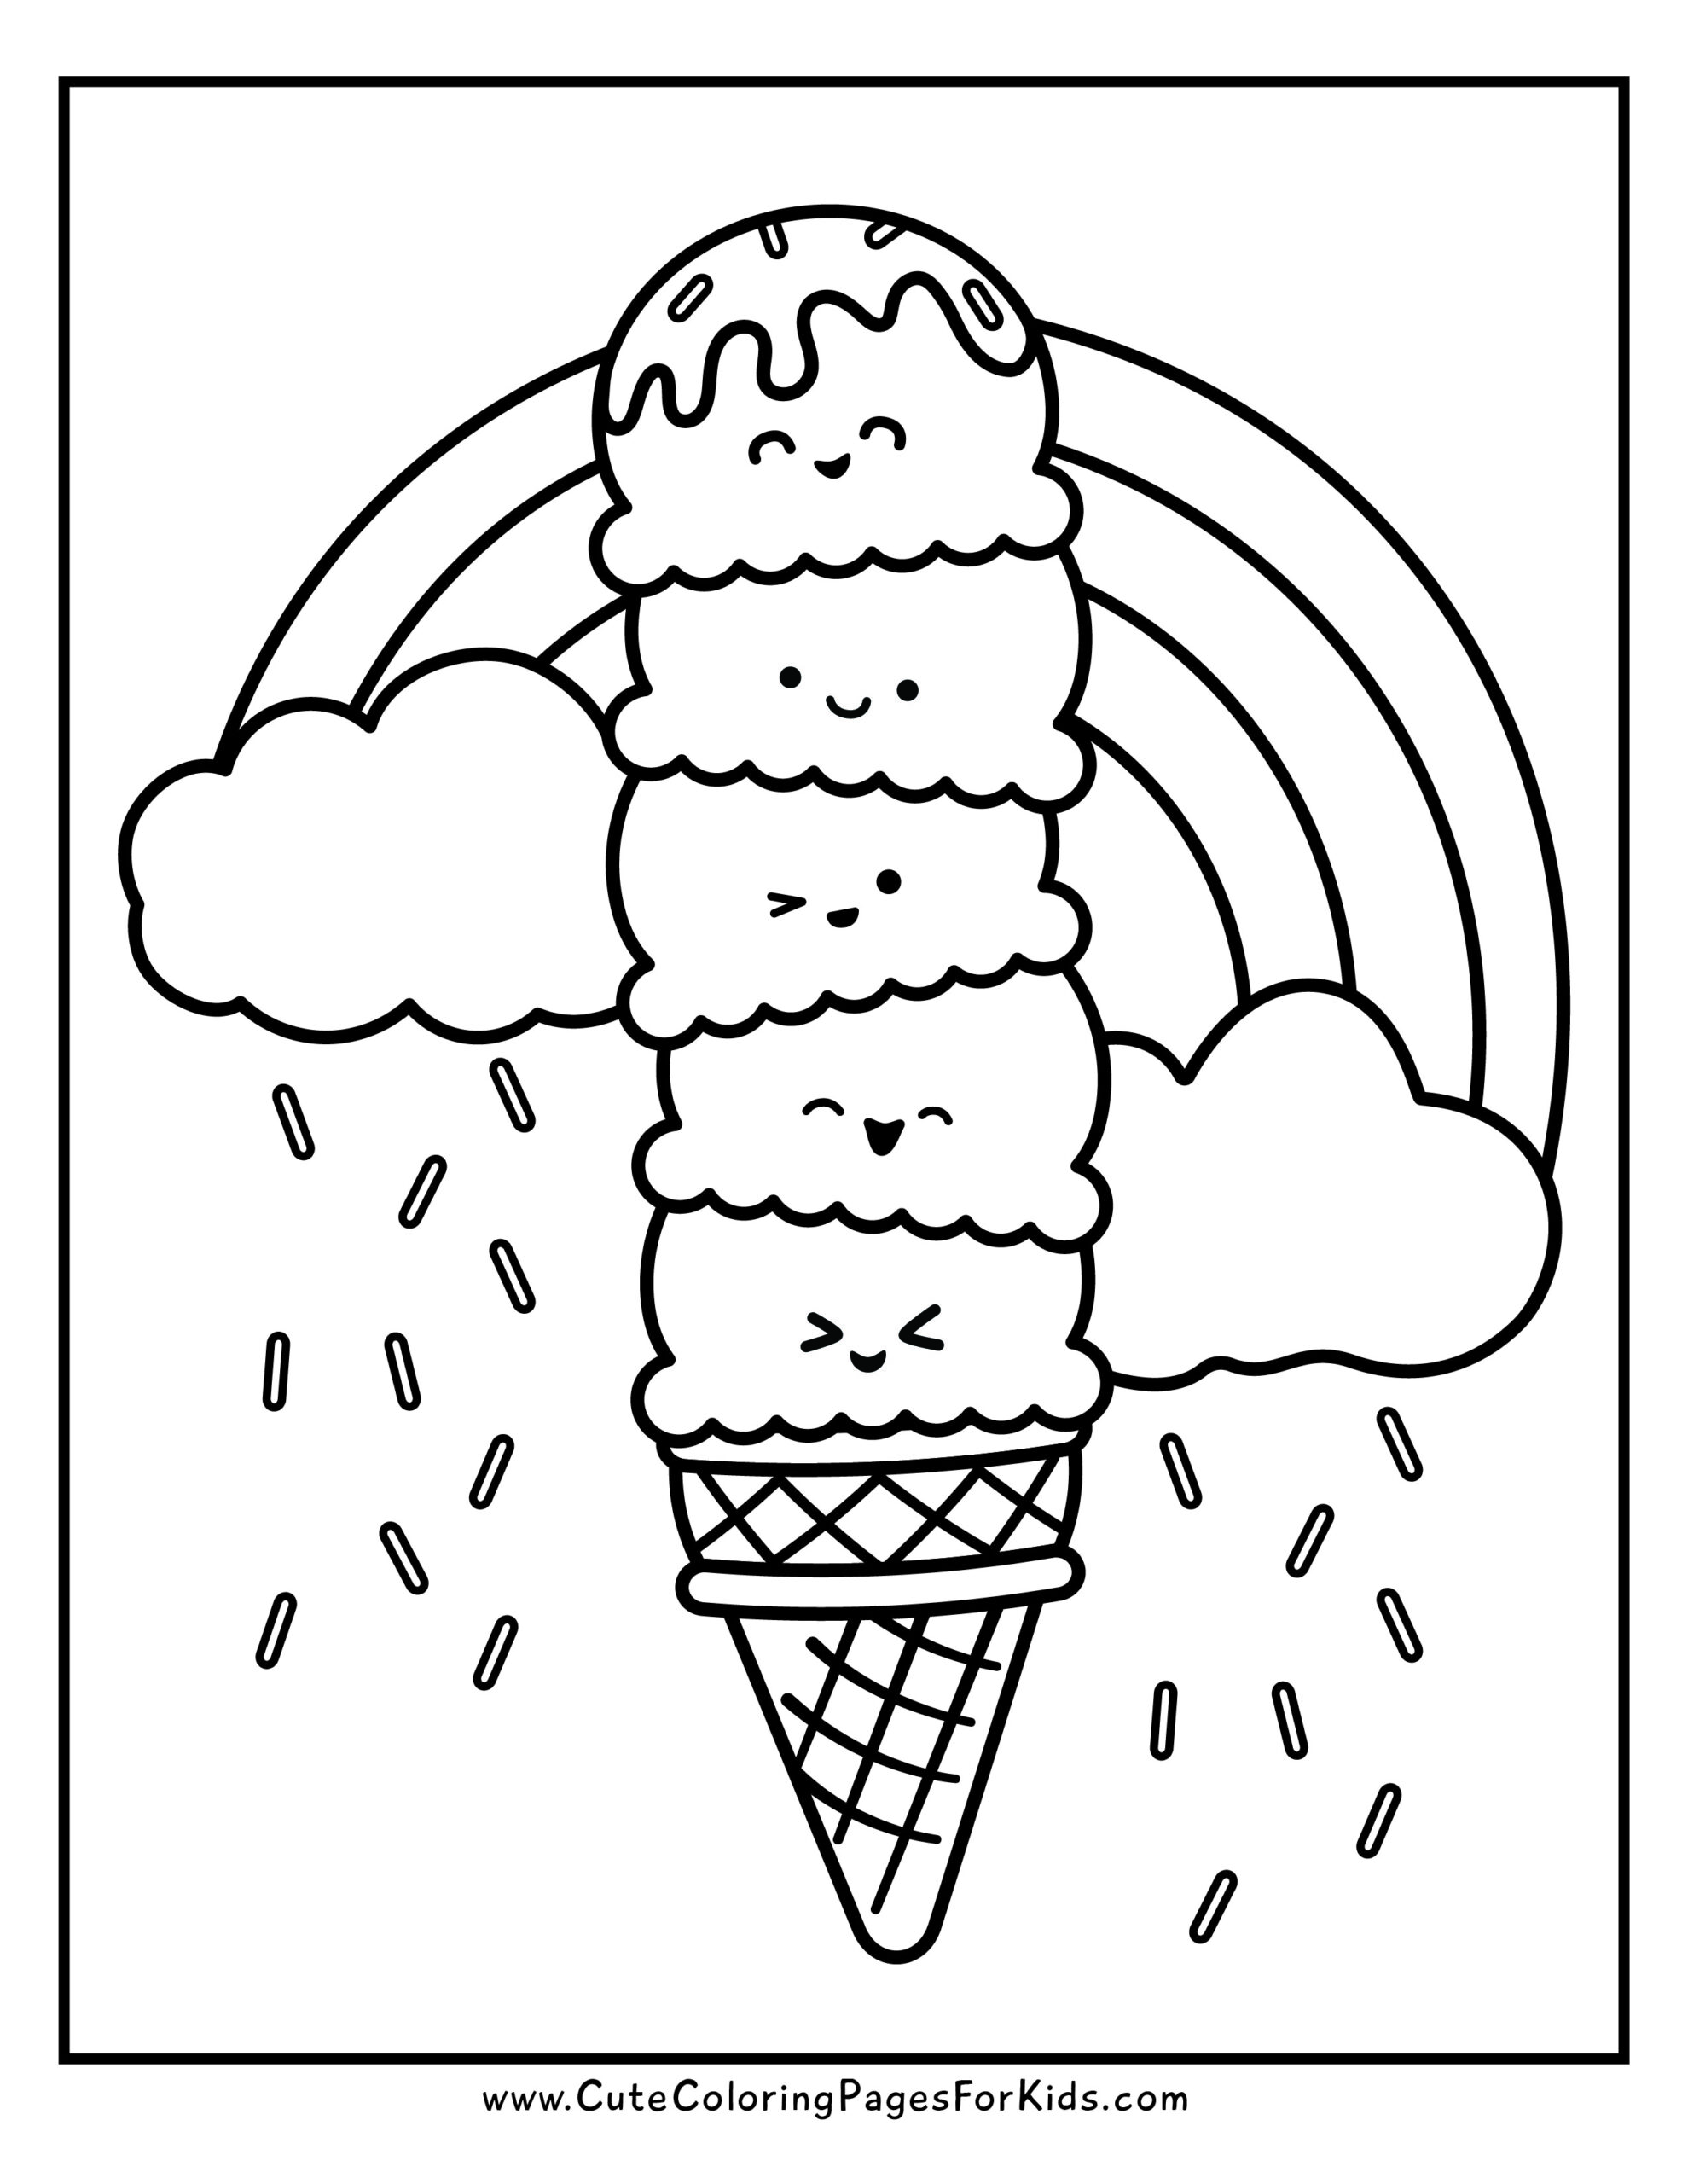 Preschool Coloring Page – Home - KidsPressMagazine.com | Preschool coloring  pages, Kids printable coloring pages, Coloring books